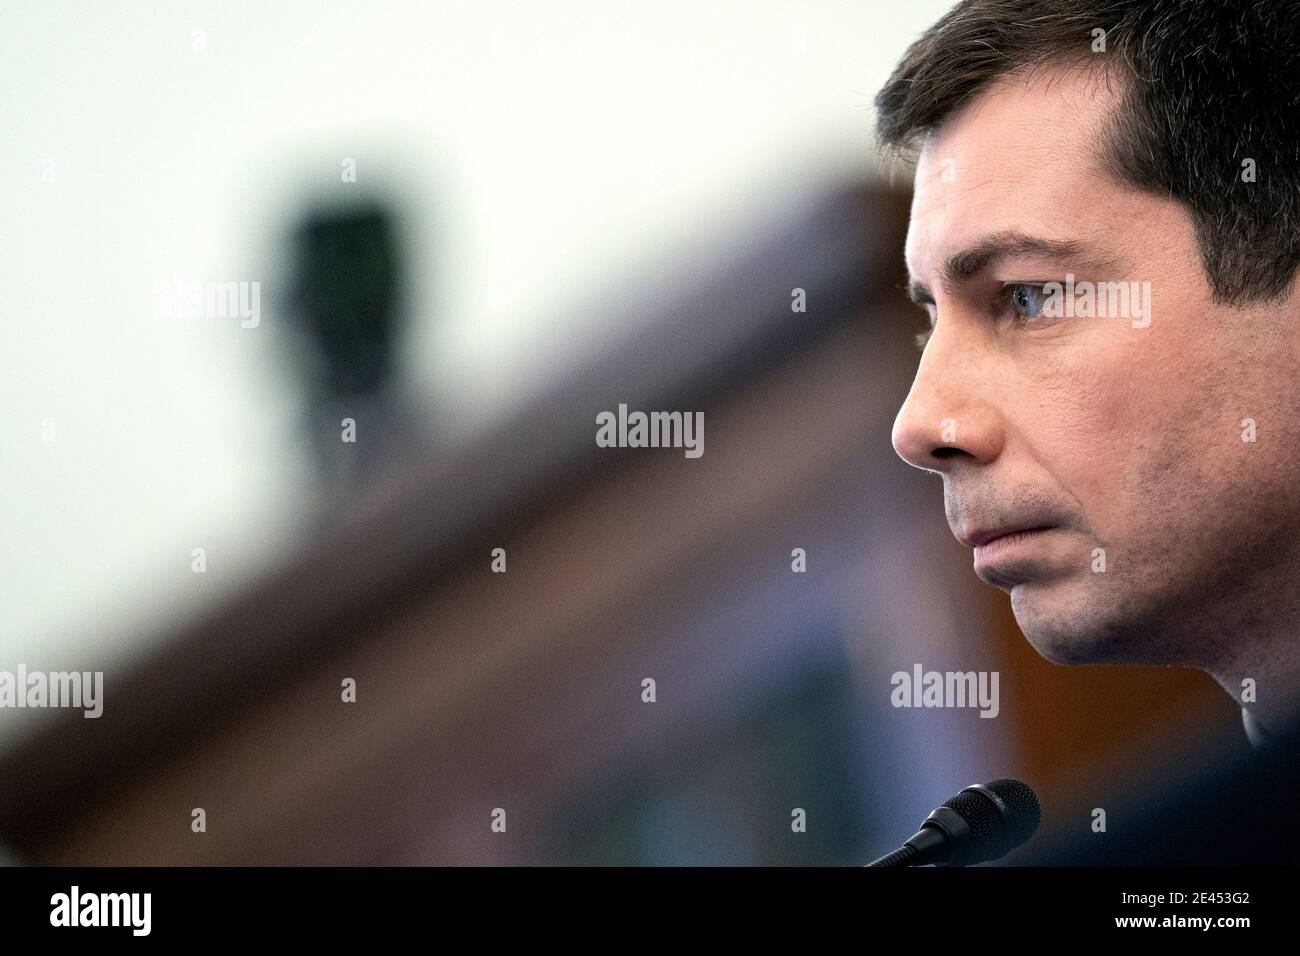 Washington, DC, USA. 21st Jan, 2021. Pete Buttigieg, U.S. secretary of transportation nominee for U.S. President Joe Biden, listens during a Senate Commerce, Science and Transportation Committee confirmation hearing in Washington, DC, U.S., on Thursday, Jan. 21, 2021. Buttigieg, is pledging to carry out the administration's ambitious agenda to rebuild the n sation's infrastructure, calling it a 'generational opportunity' to create new jobs, fight economic inequality and stem climate change. Credit: Stefani Reynolds/Pool via CNP | usage worldwide Credit: dpa/Alamy Live News Stock Photo